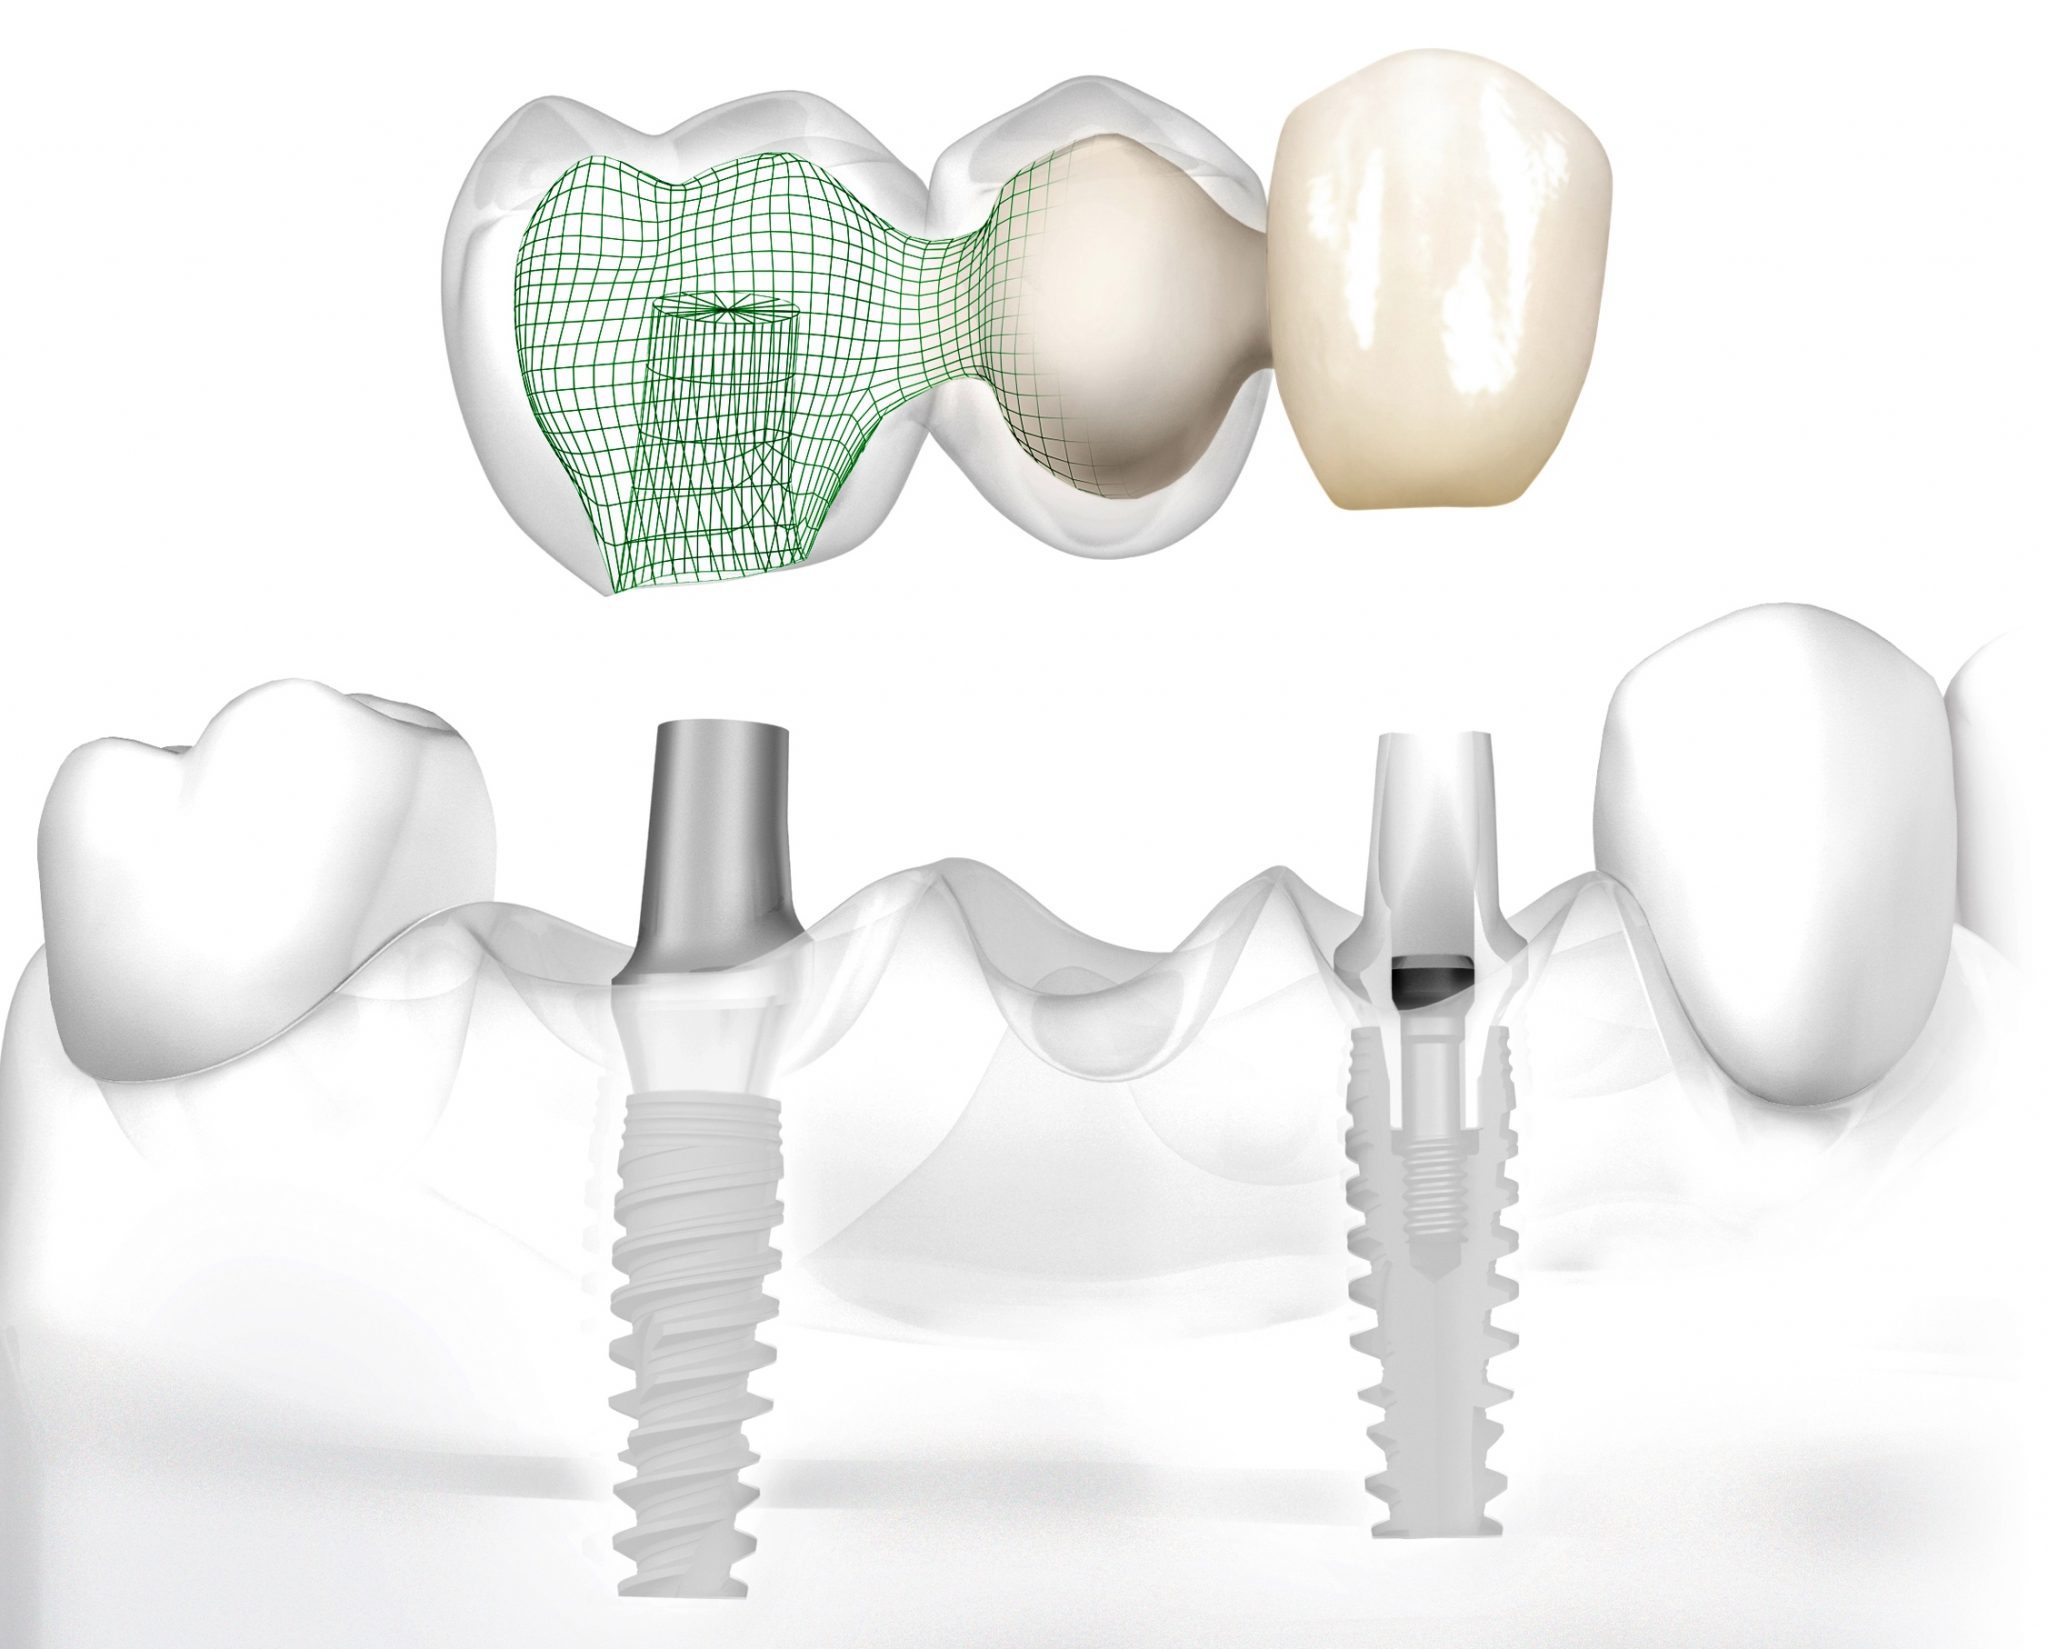 Options for replacing missing teeth